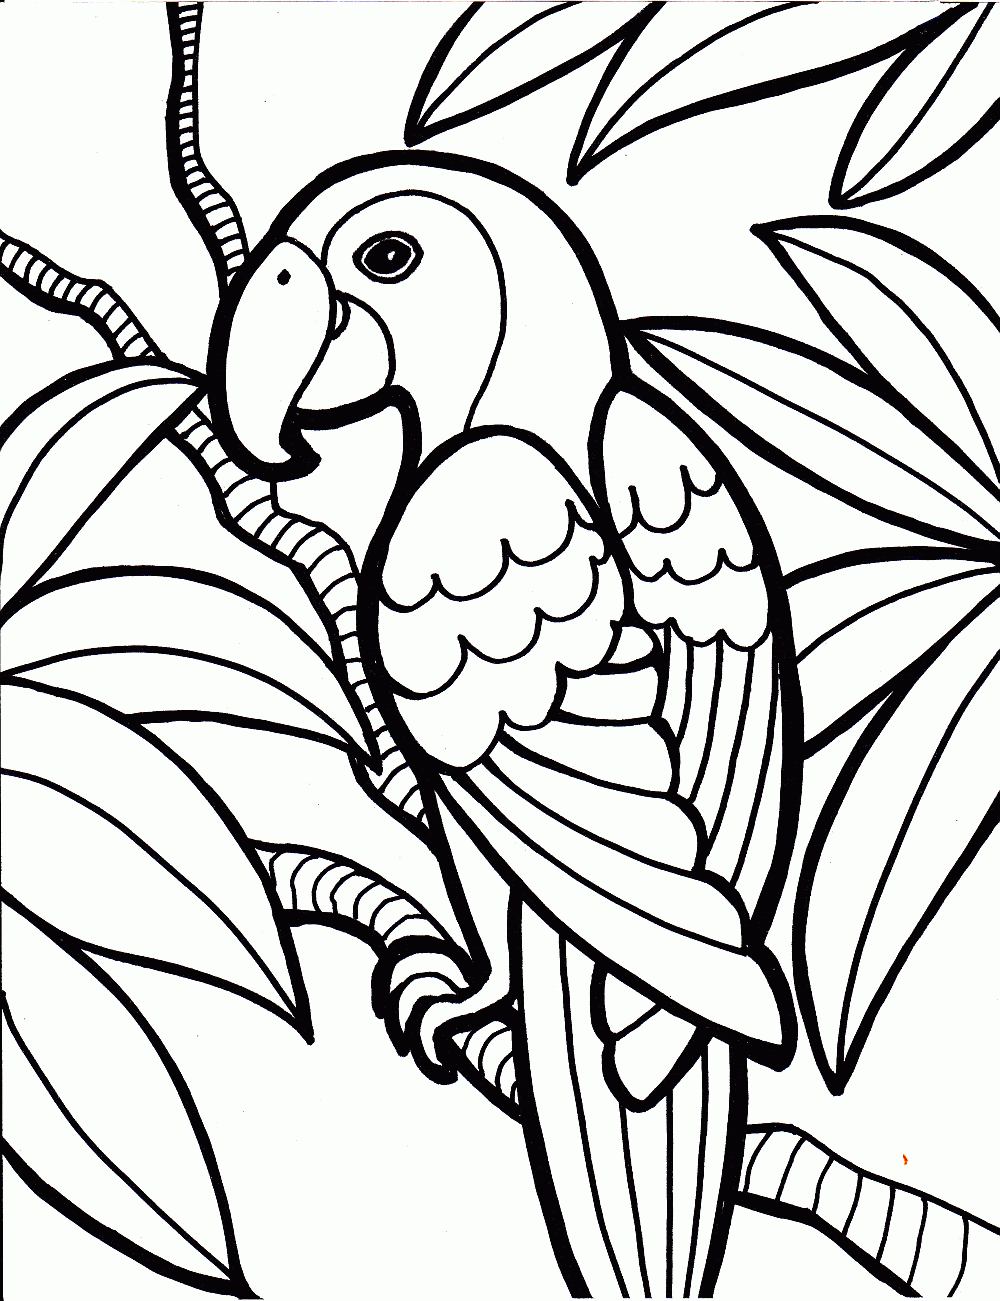 Bird Coloring Pages | Coloring Pages To Print